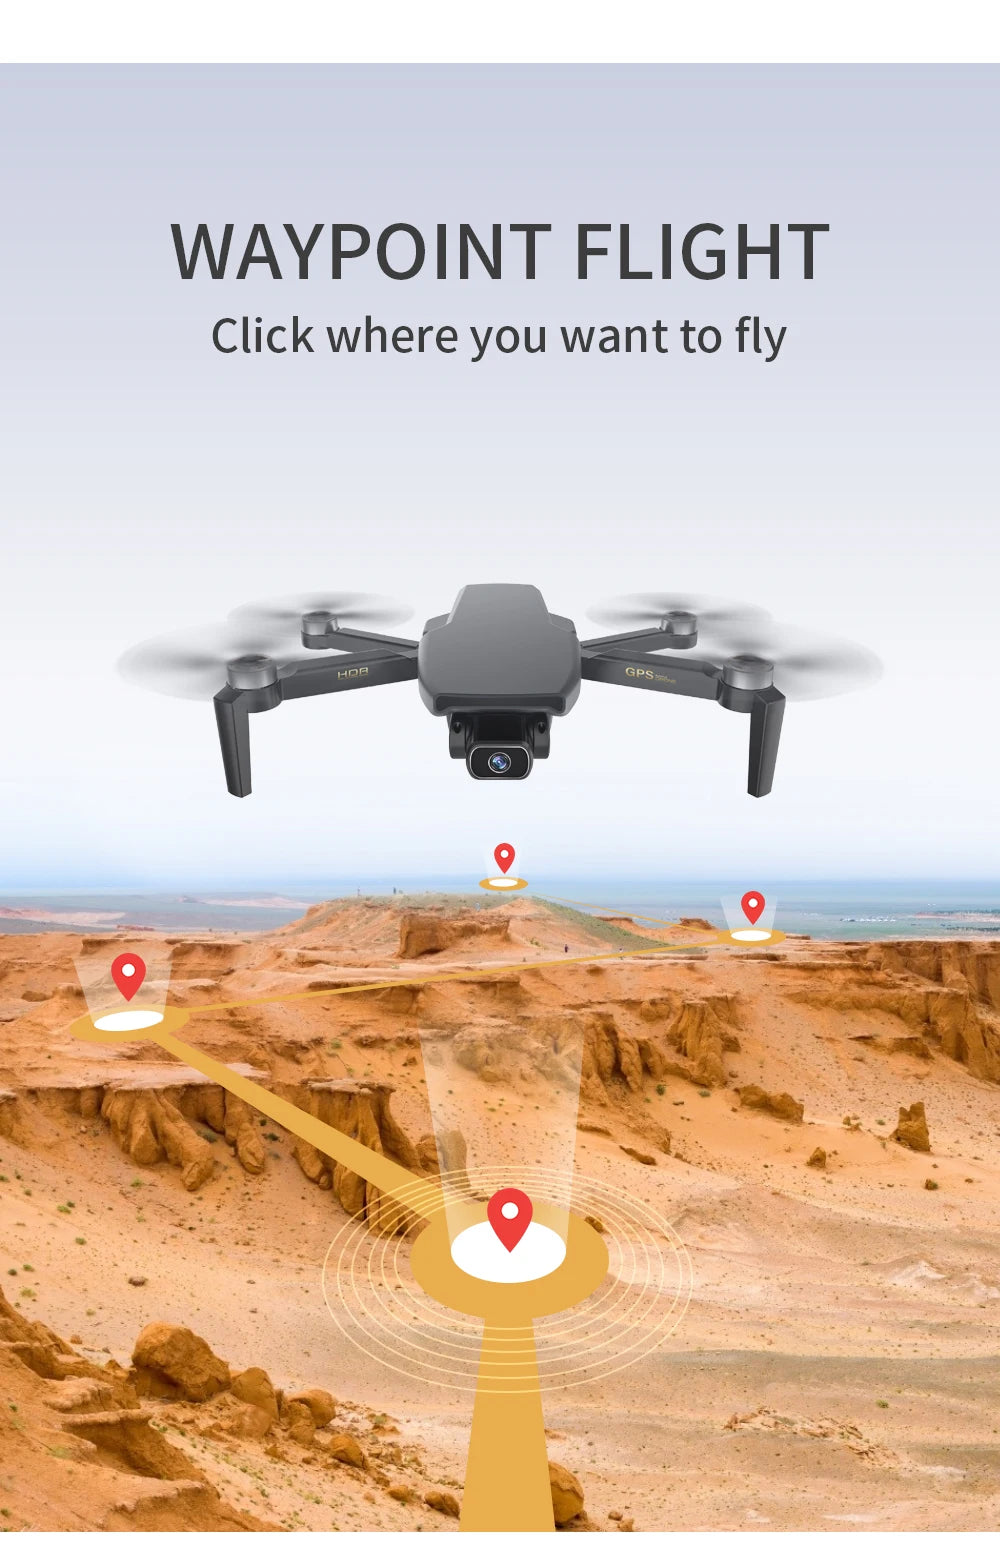 G108 Pro MAx Drone, WAYPOINT FLIGHT Click where you want to fly HOQ GpS